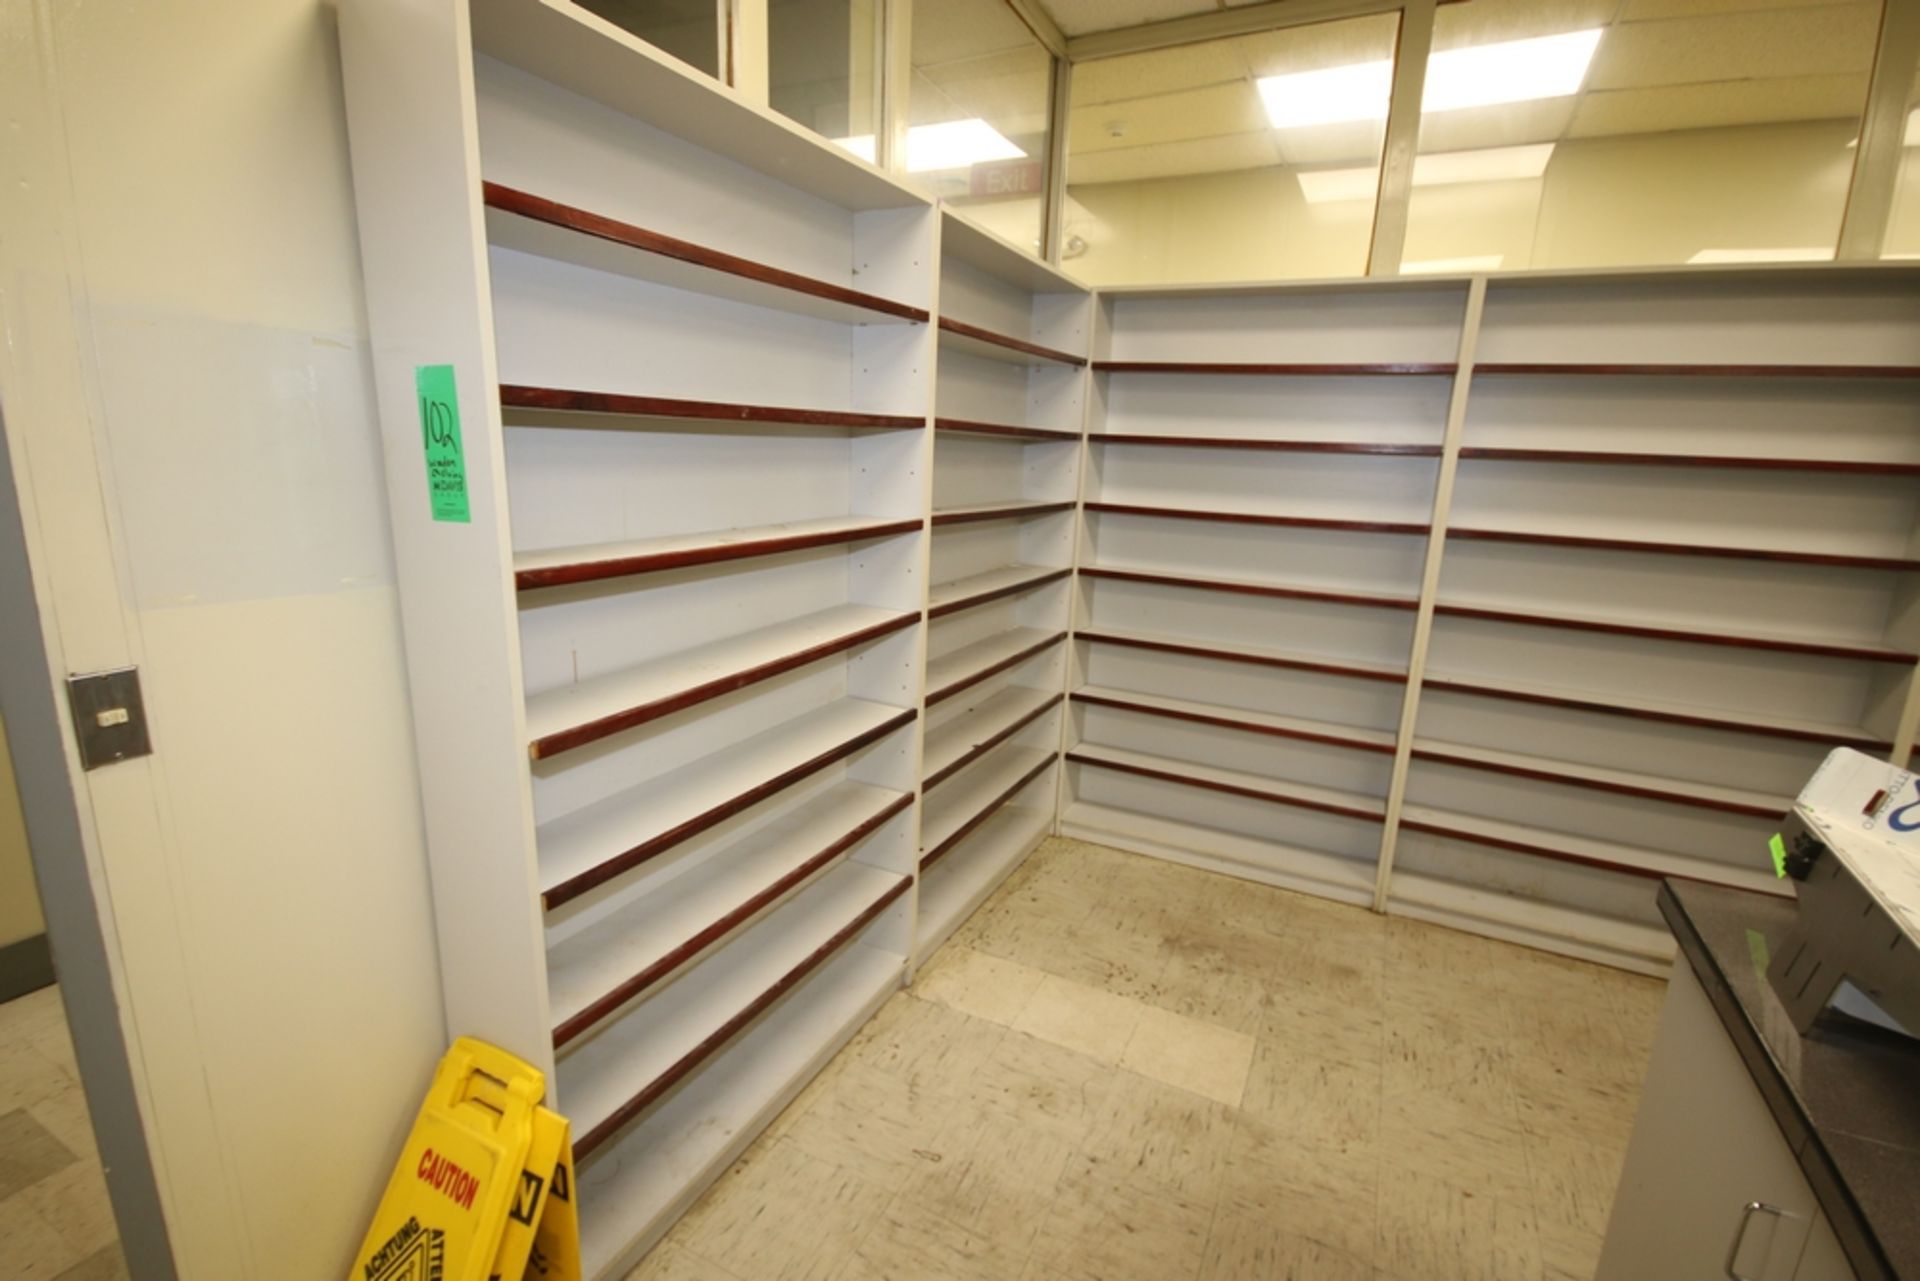 Sections of Wooden Lab Shelving, Section Overall Dims.: Aprox. 7' H x 4' W